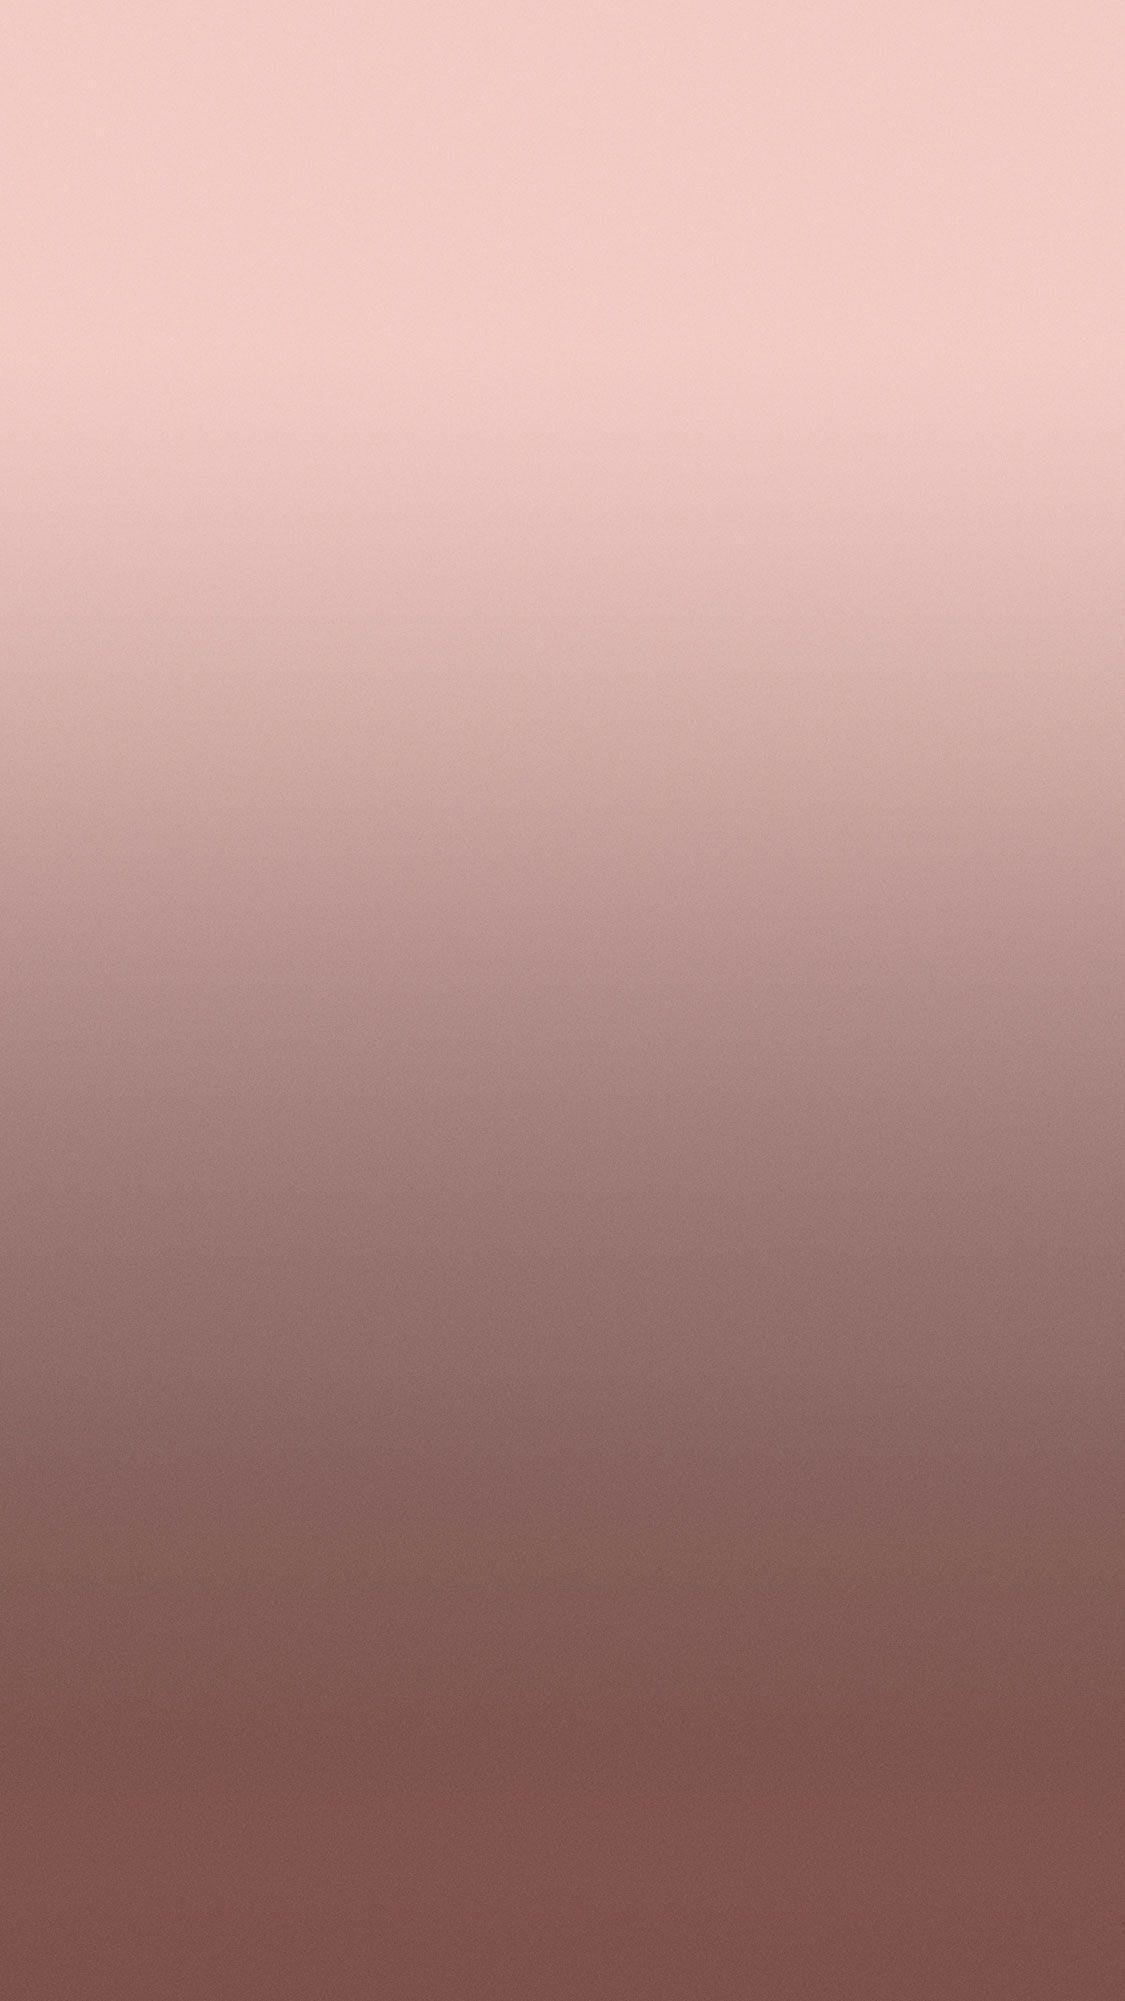 1125x2001 20+ New iPhone 6 & 6S Wallpapers & Backgrounds in HD Quality